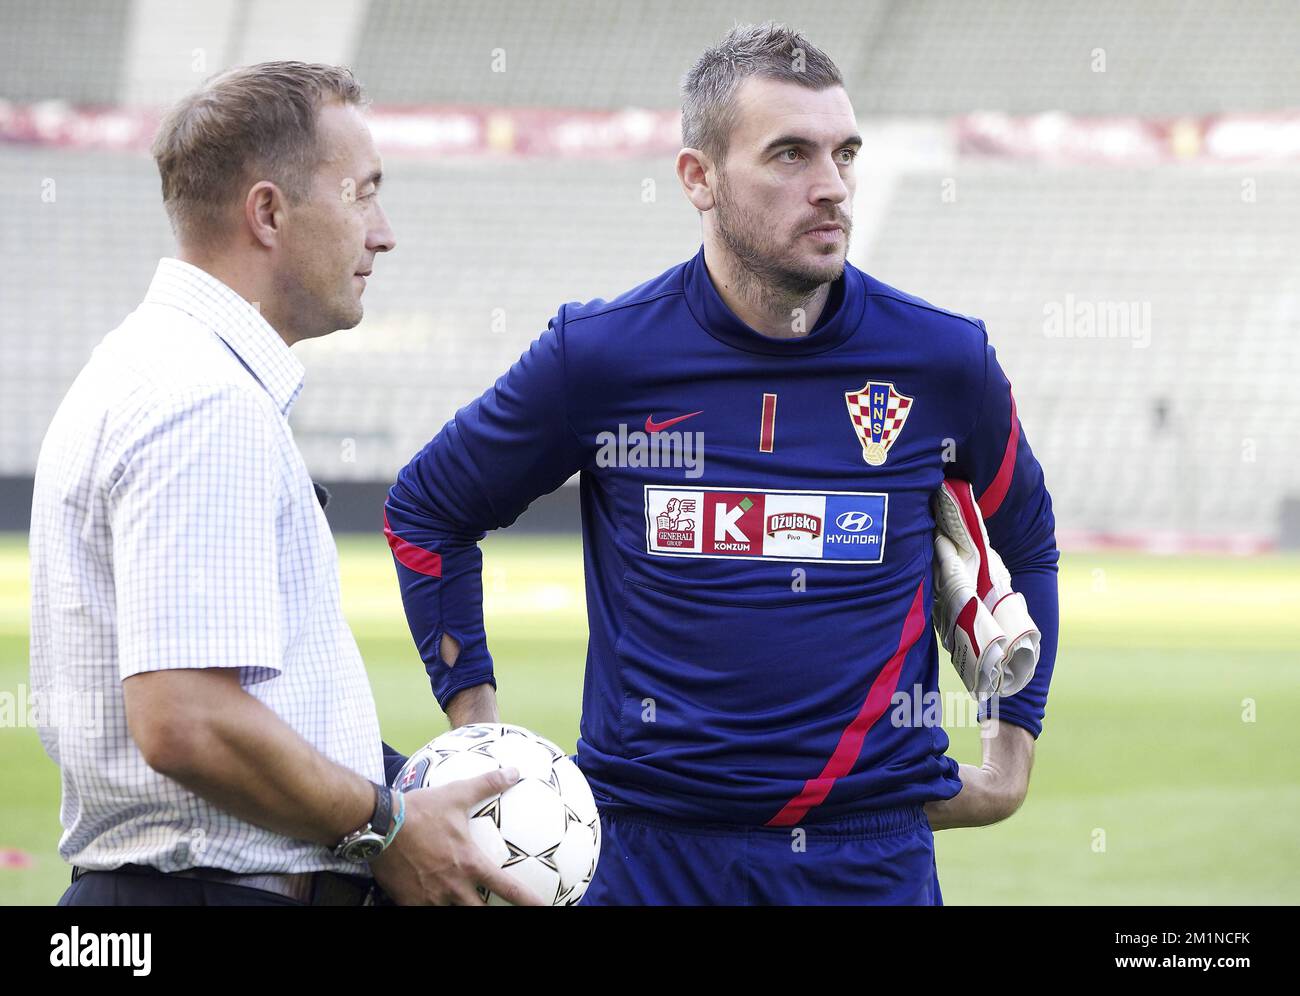 20120910 - BRUSSELS, BELGIUM: Croatian's goalkeeper Stipe Pletikosa pictured during a training session of the Croatian national soccer team, Monday 10 September 2012 at the King Baudouin stadium, in Brussels. The team is preparing for the second qualifying match for the 2014 Soccer World Championships, against Belgium tomorrow. BELGA PHOTO NICOLAS MAETERLINCK Stock Photo